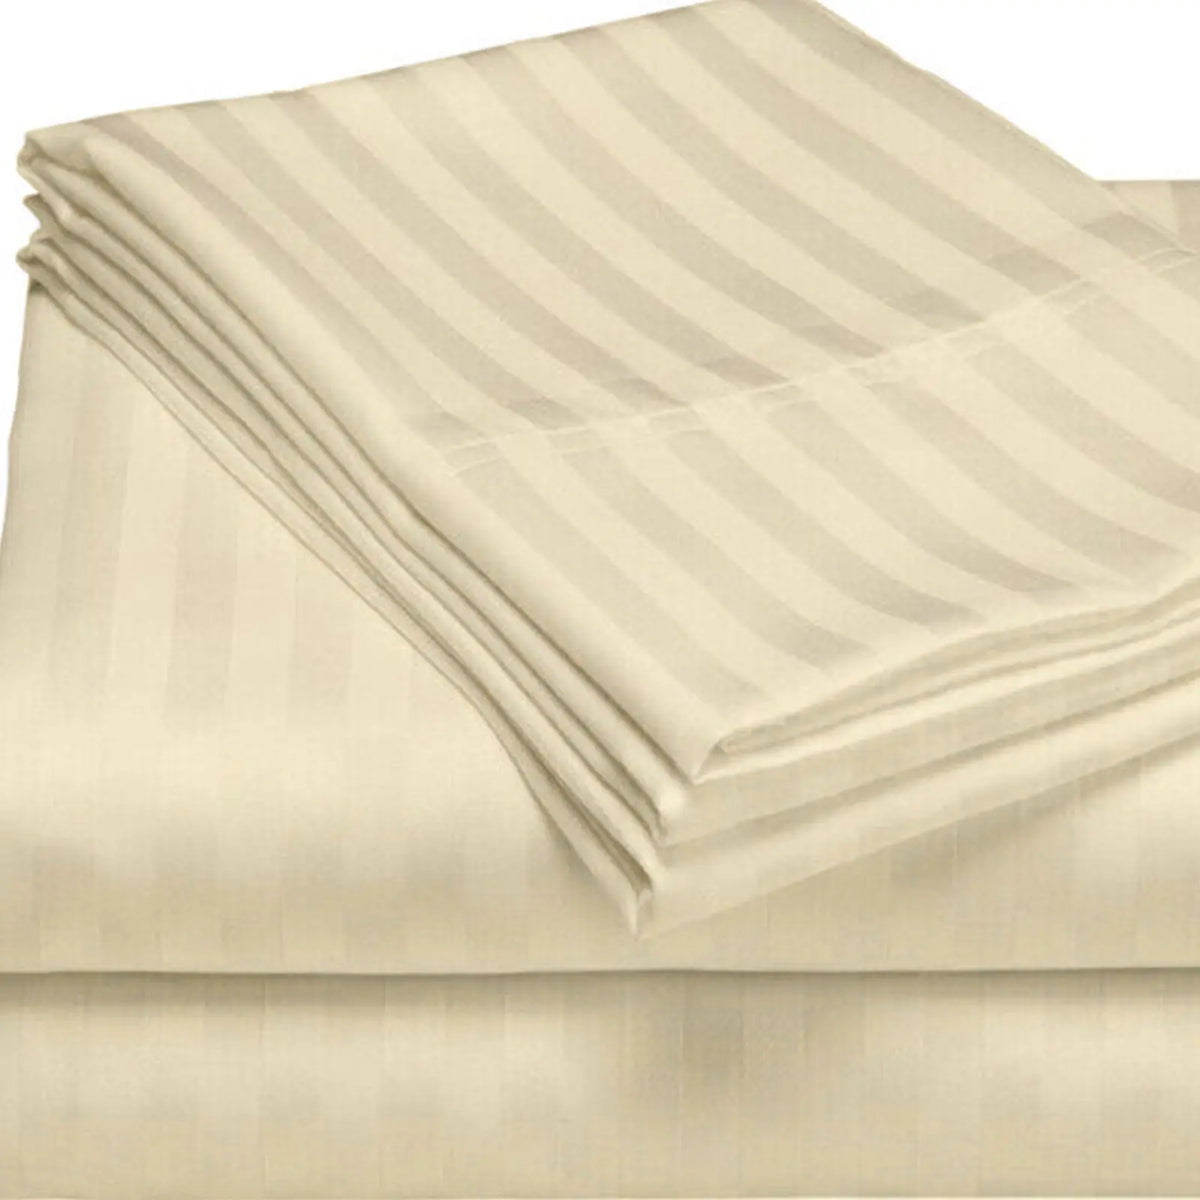 Pastel Yellow Pure Egyptian Cotton Flat Sheet Super King 330 TC 500 Thread Count Equivalent Satin Stripe Bed Sheet - Beach Stone